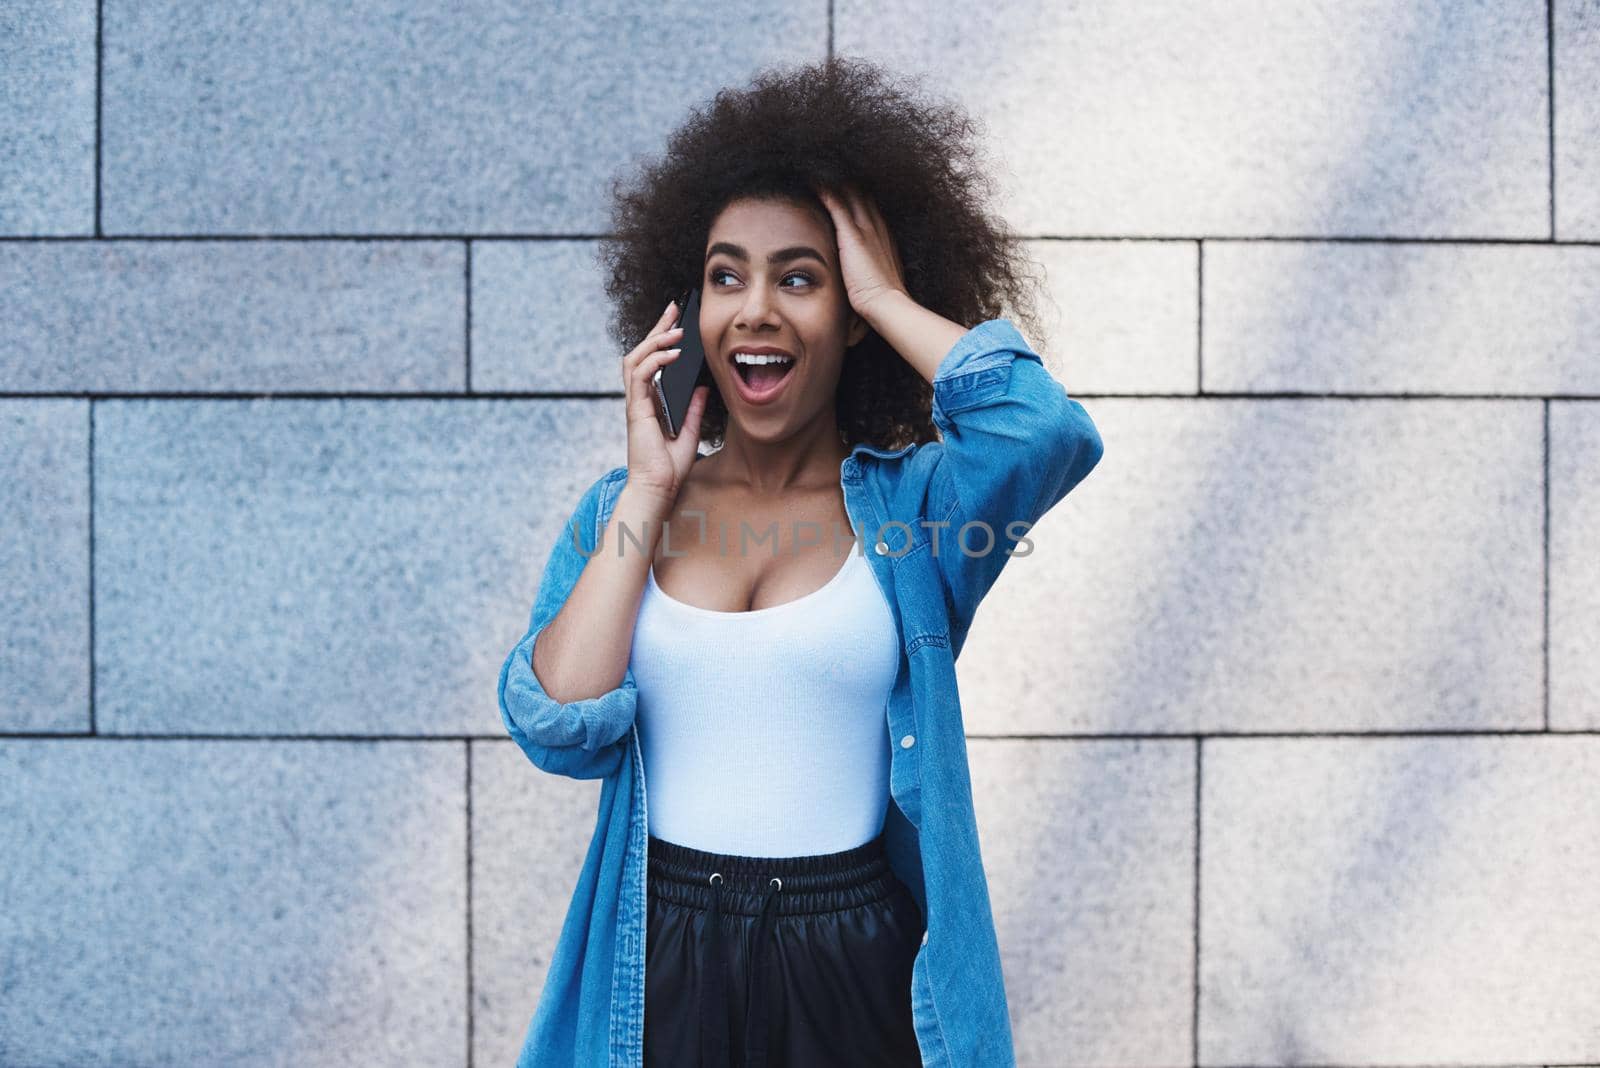 Young woman wearing jeans jacket free style on the street standing isolated on concrete wall talking on smartphone with friend touching head shouting surprised